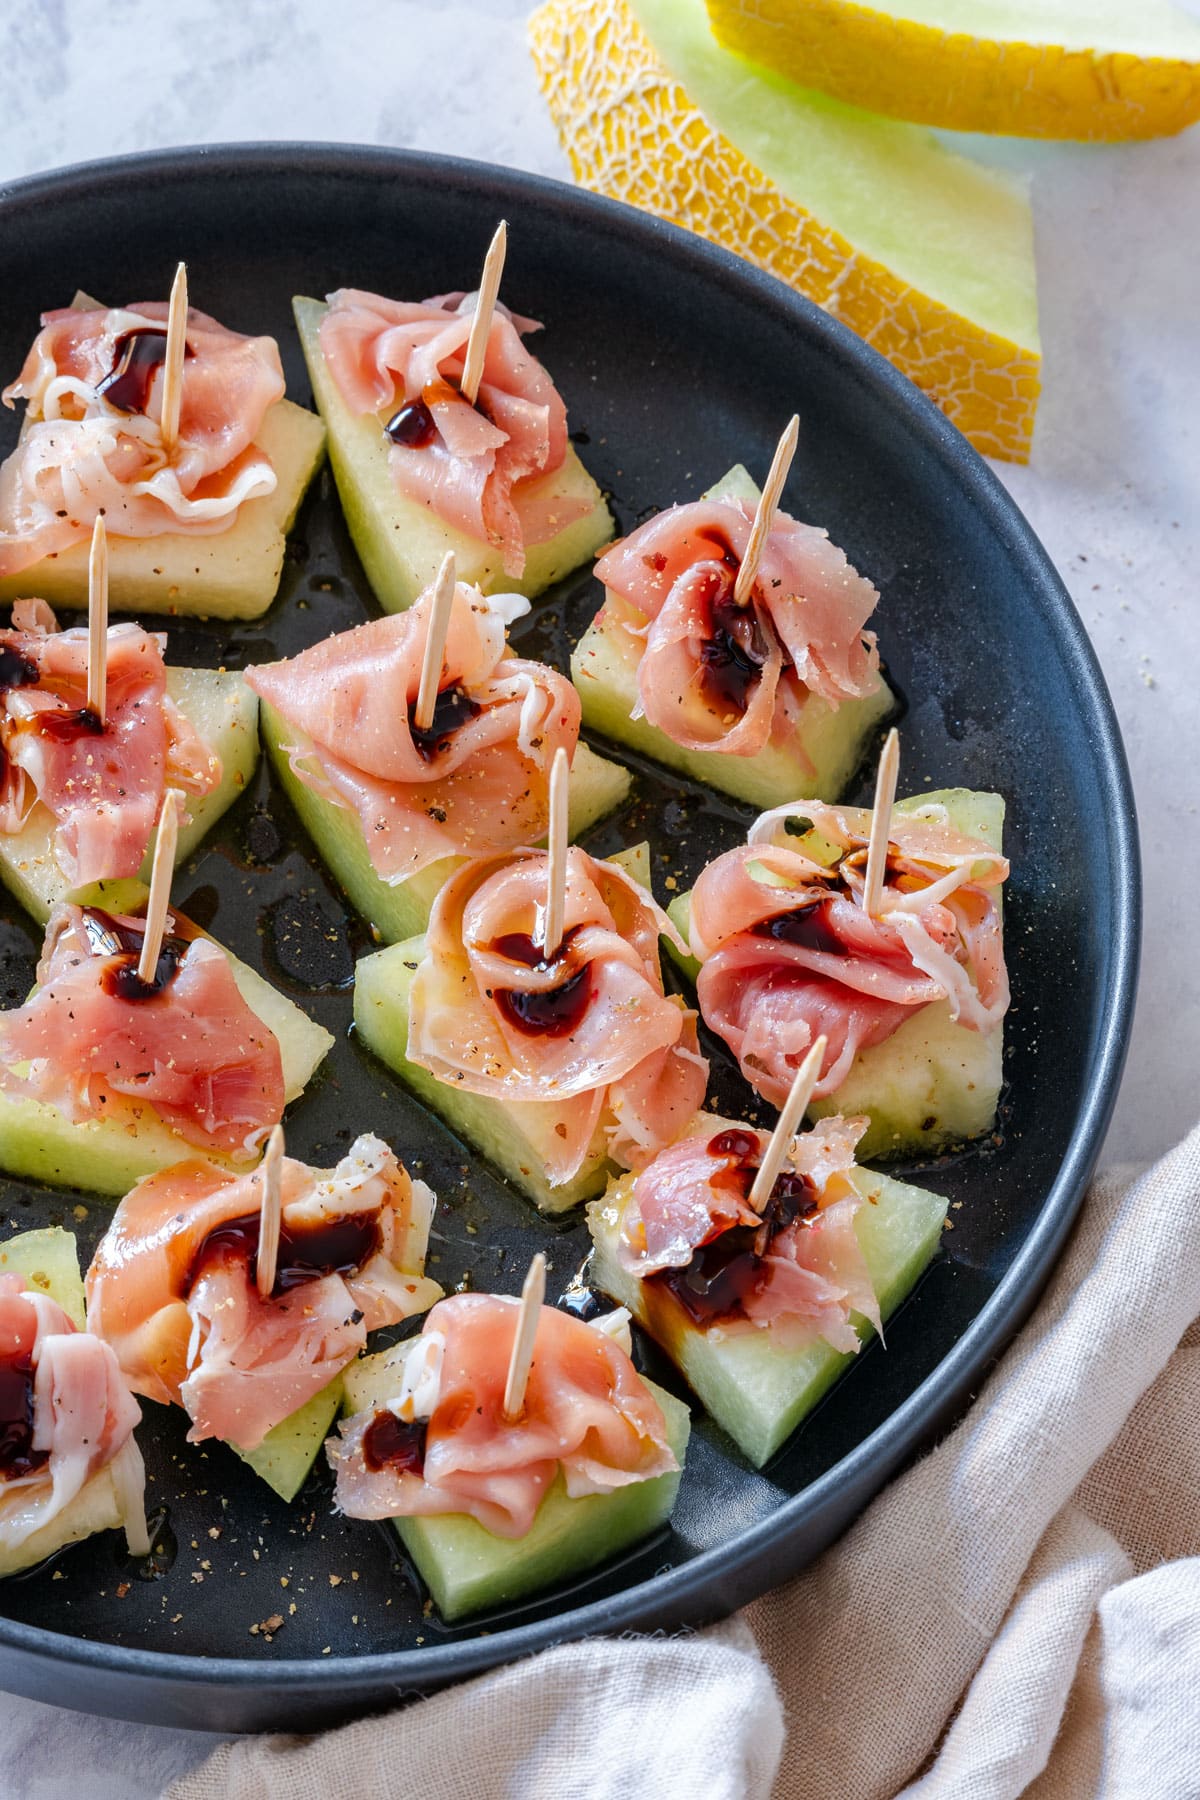 Prosciutto and melon appetizers with balsamic glaze on a black plate.